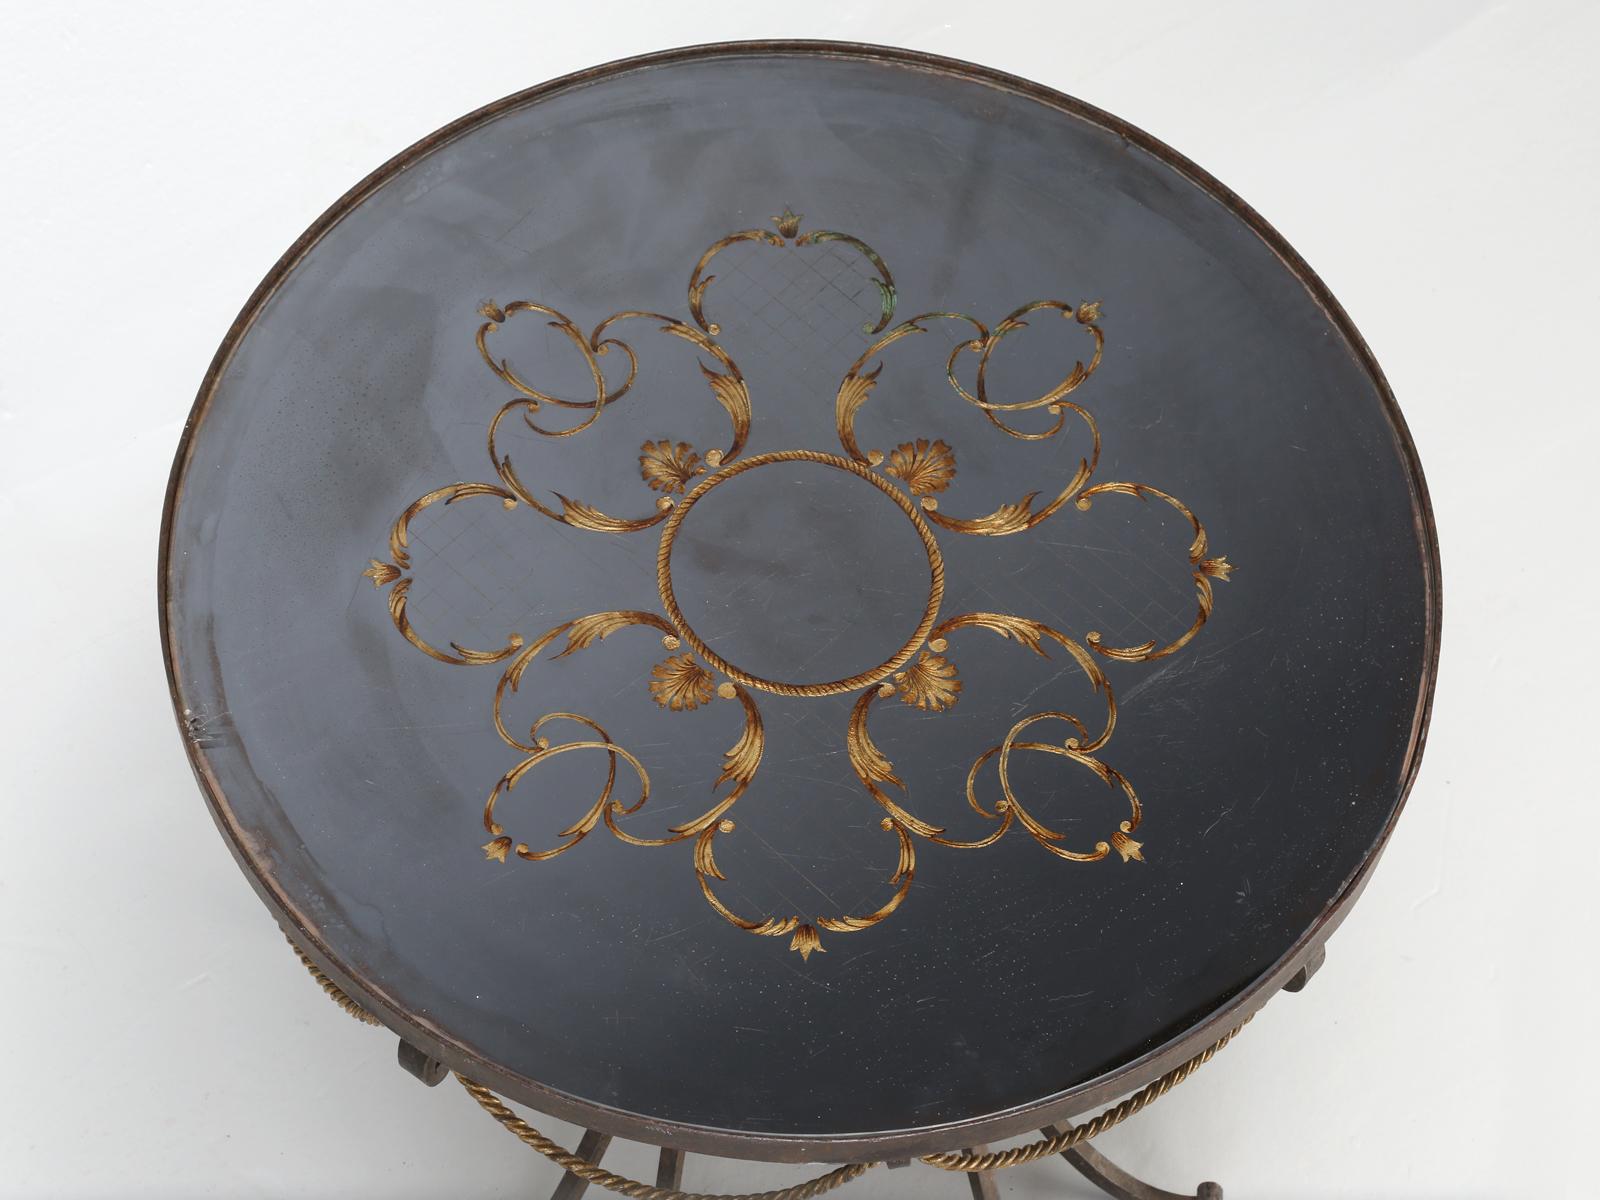 French art Deco coffee table, attributed to Raymond Subes (notable for his extraordinary ironwork) and Max Ingrand. Hand-fabricated wrought-iron table base, with gilded ornamentation. The glass top of our Raymond Subes coffee table, is commonly